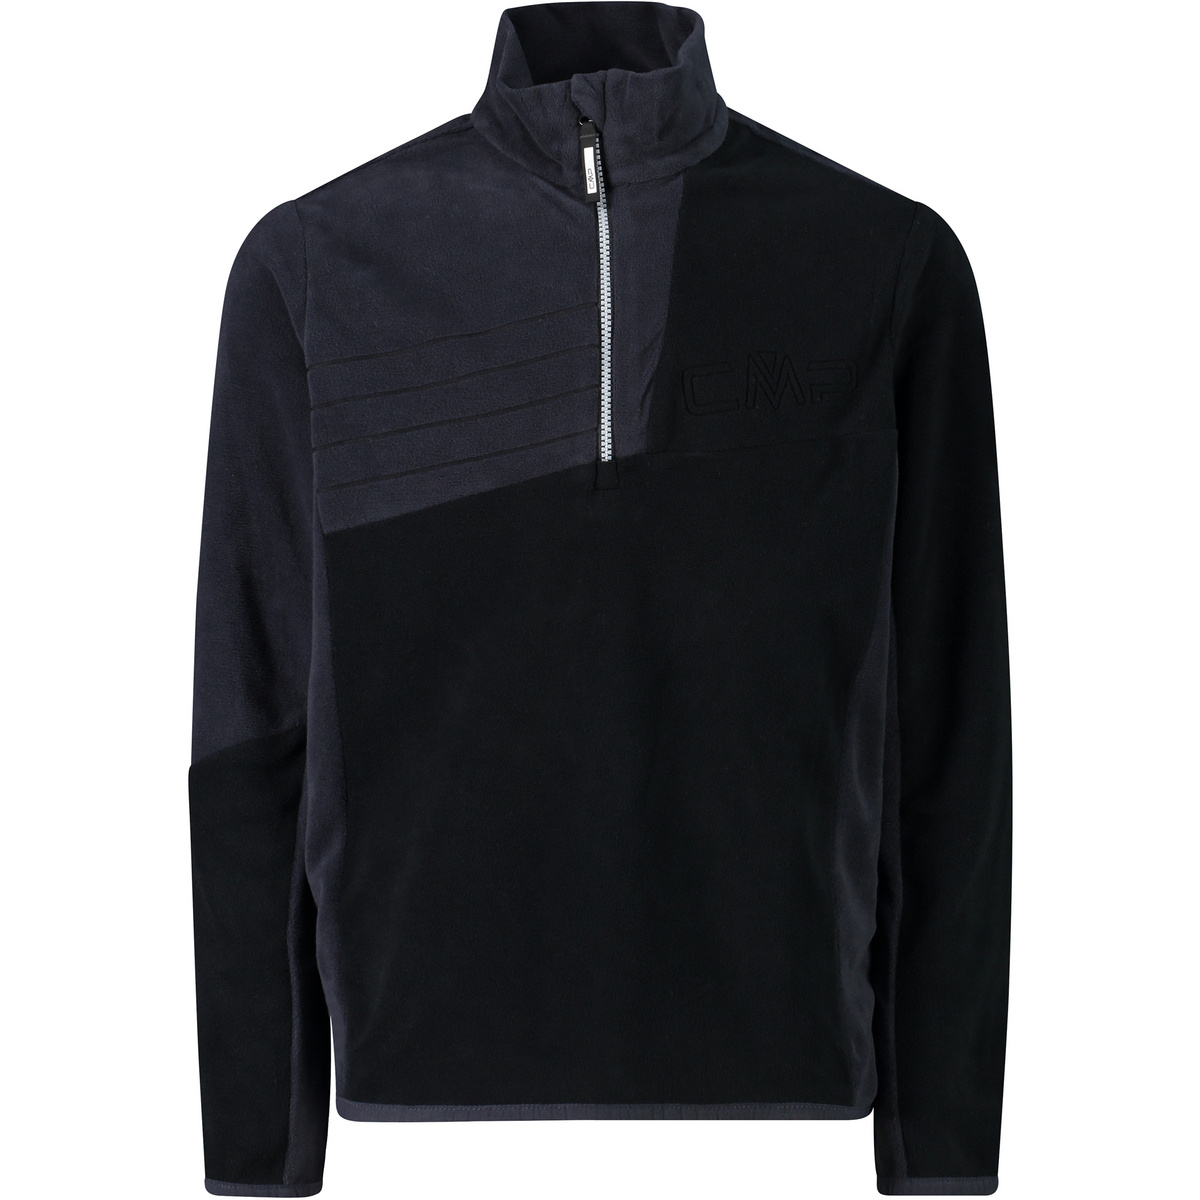 Image of CMP Bambino Pullover